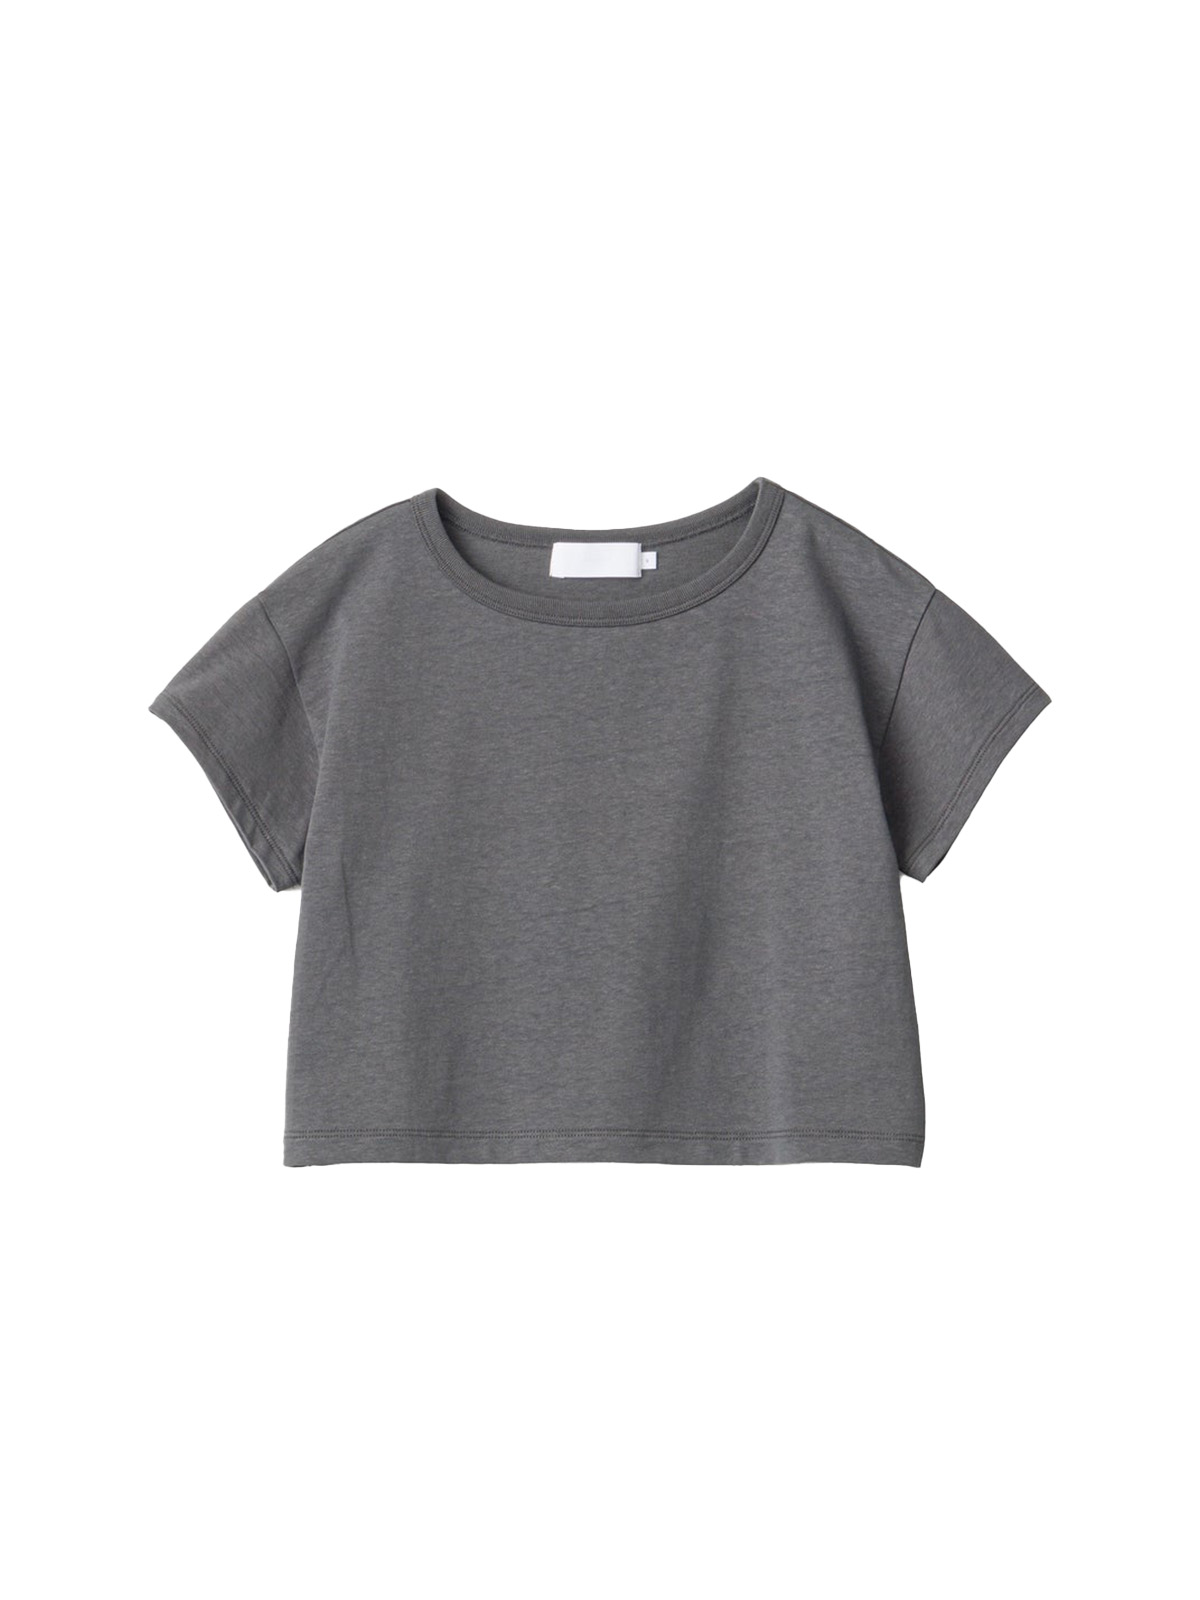 RECYCLED COTTON JERSEY COMPACT TEE (GRAY)